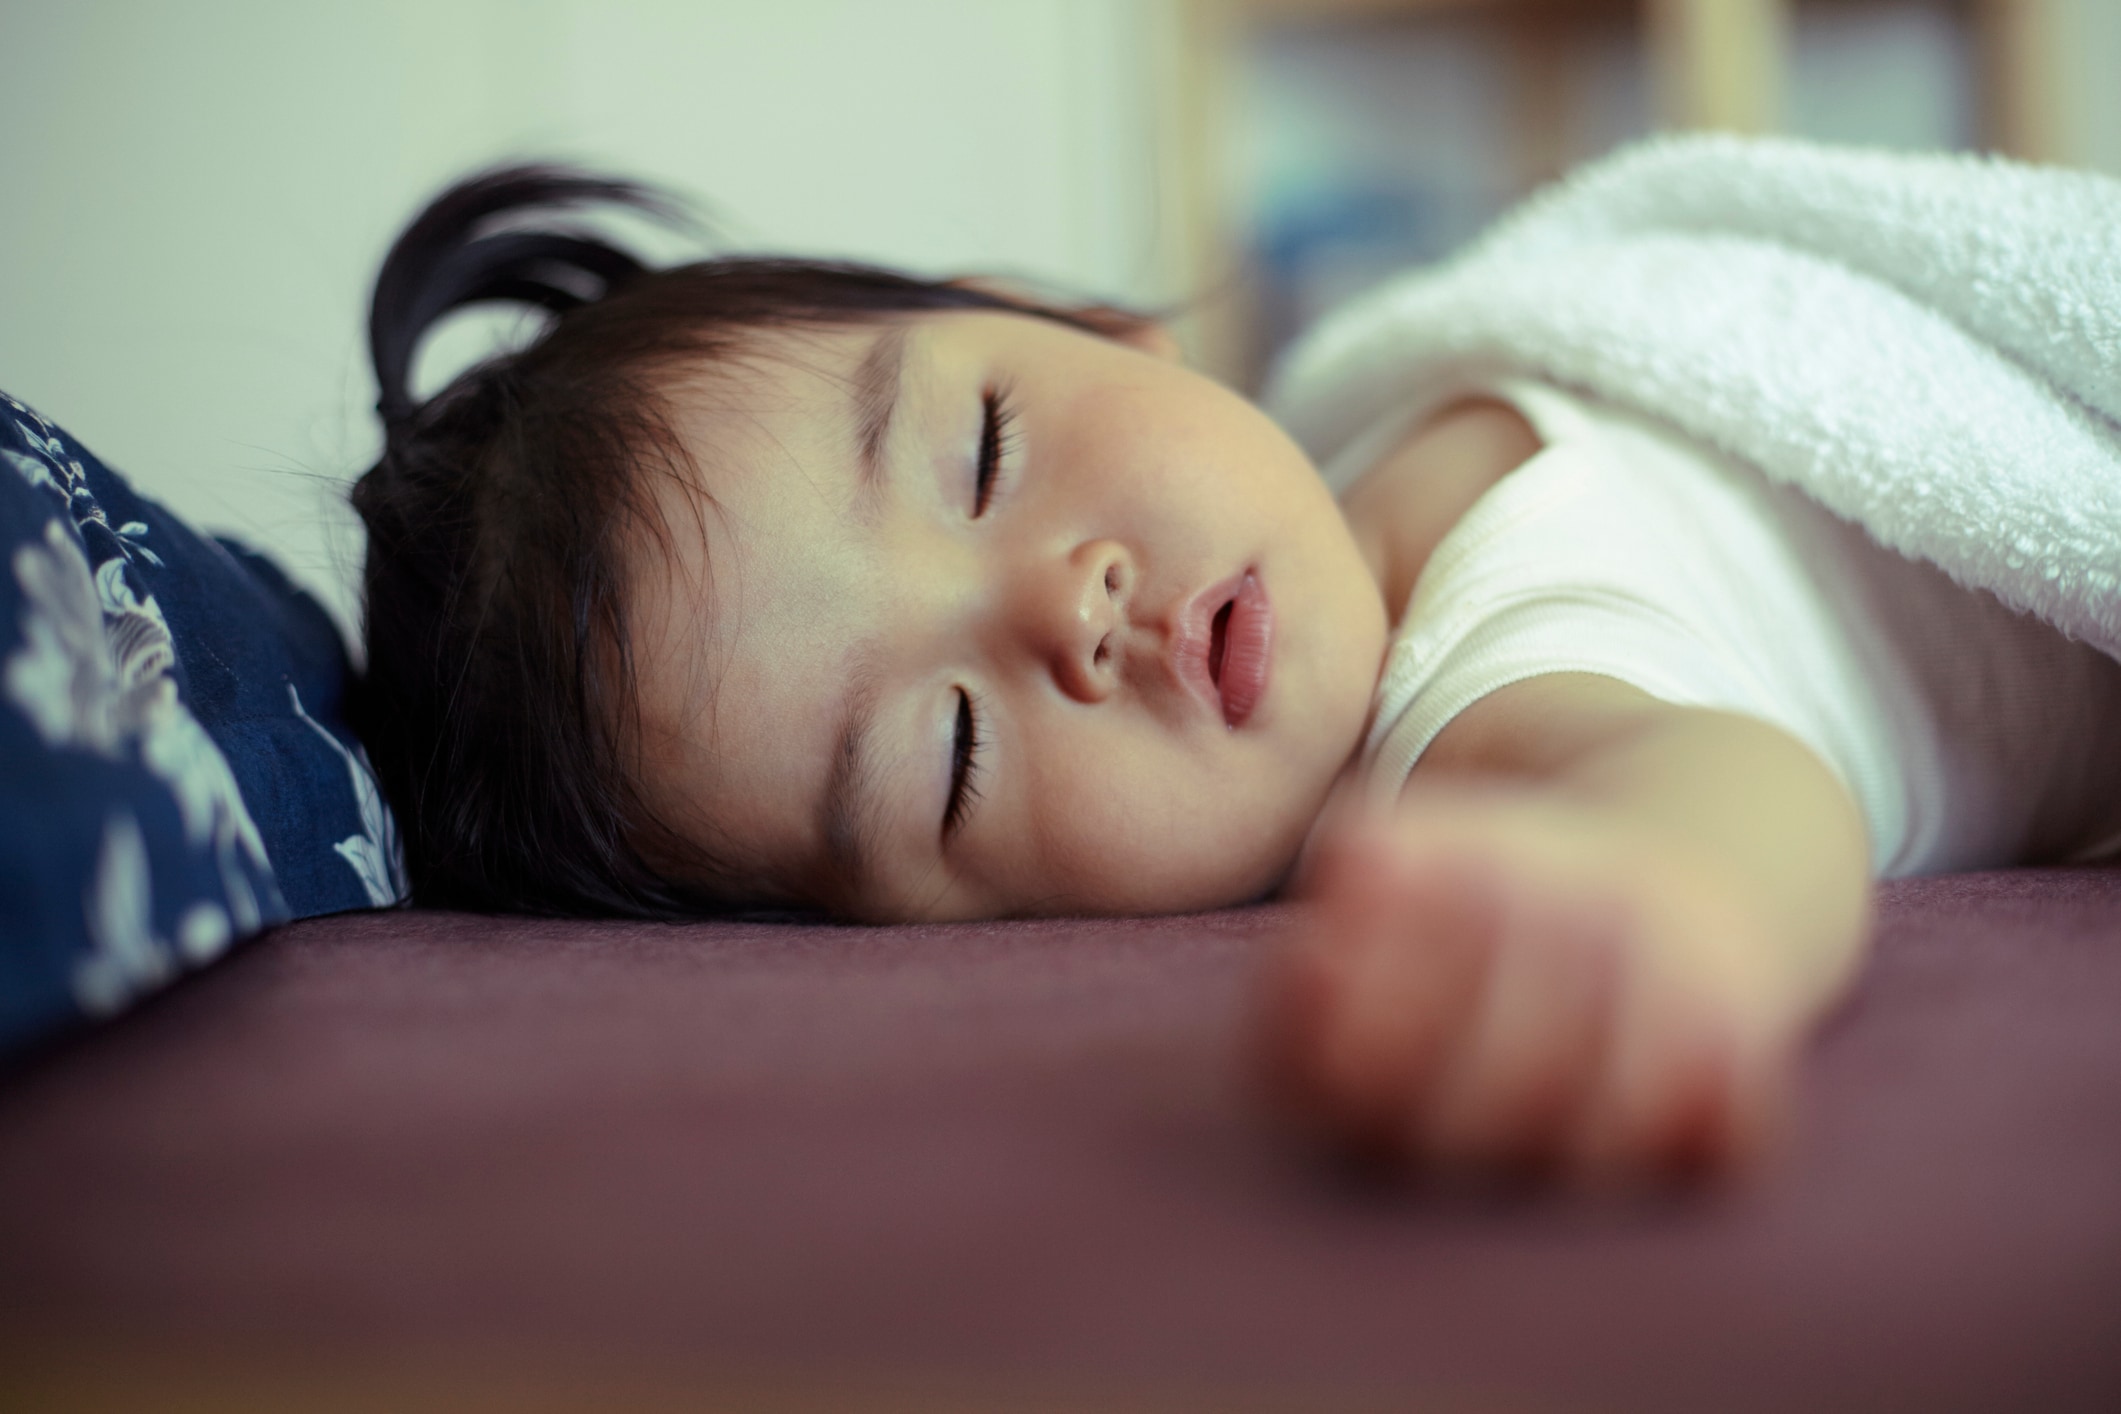 Baby sleep training methods: What experts say you need to know